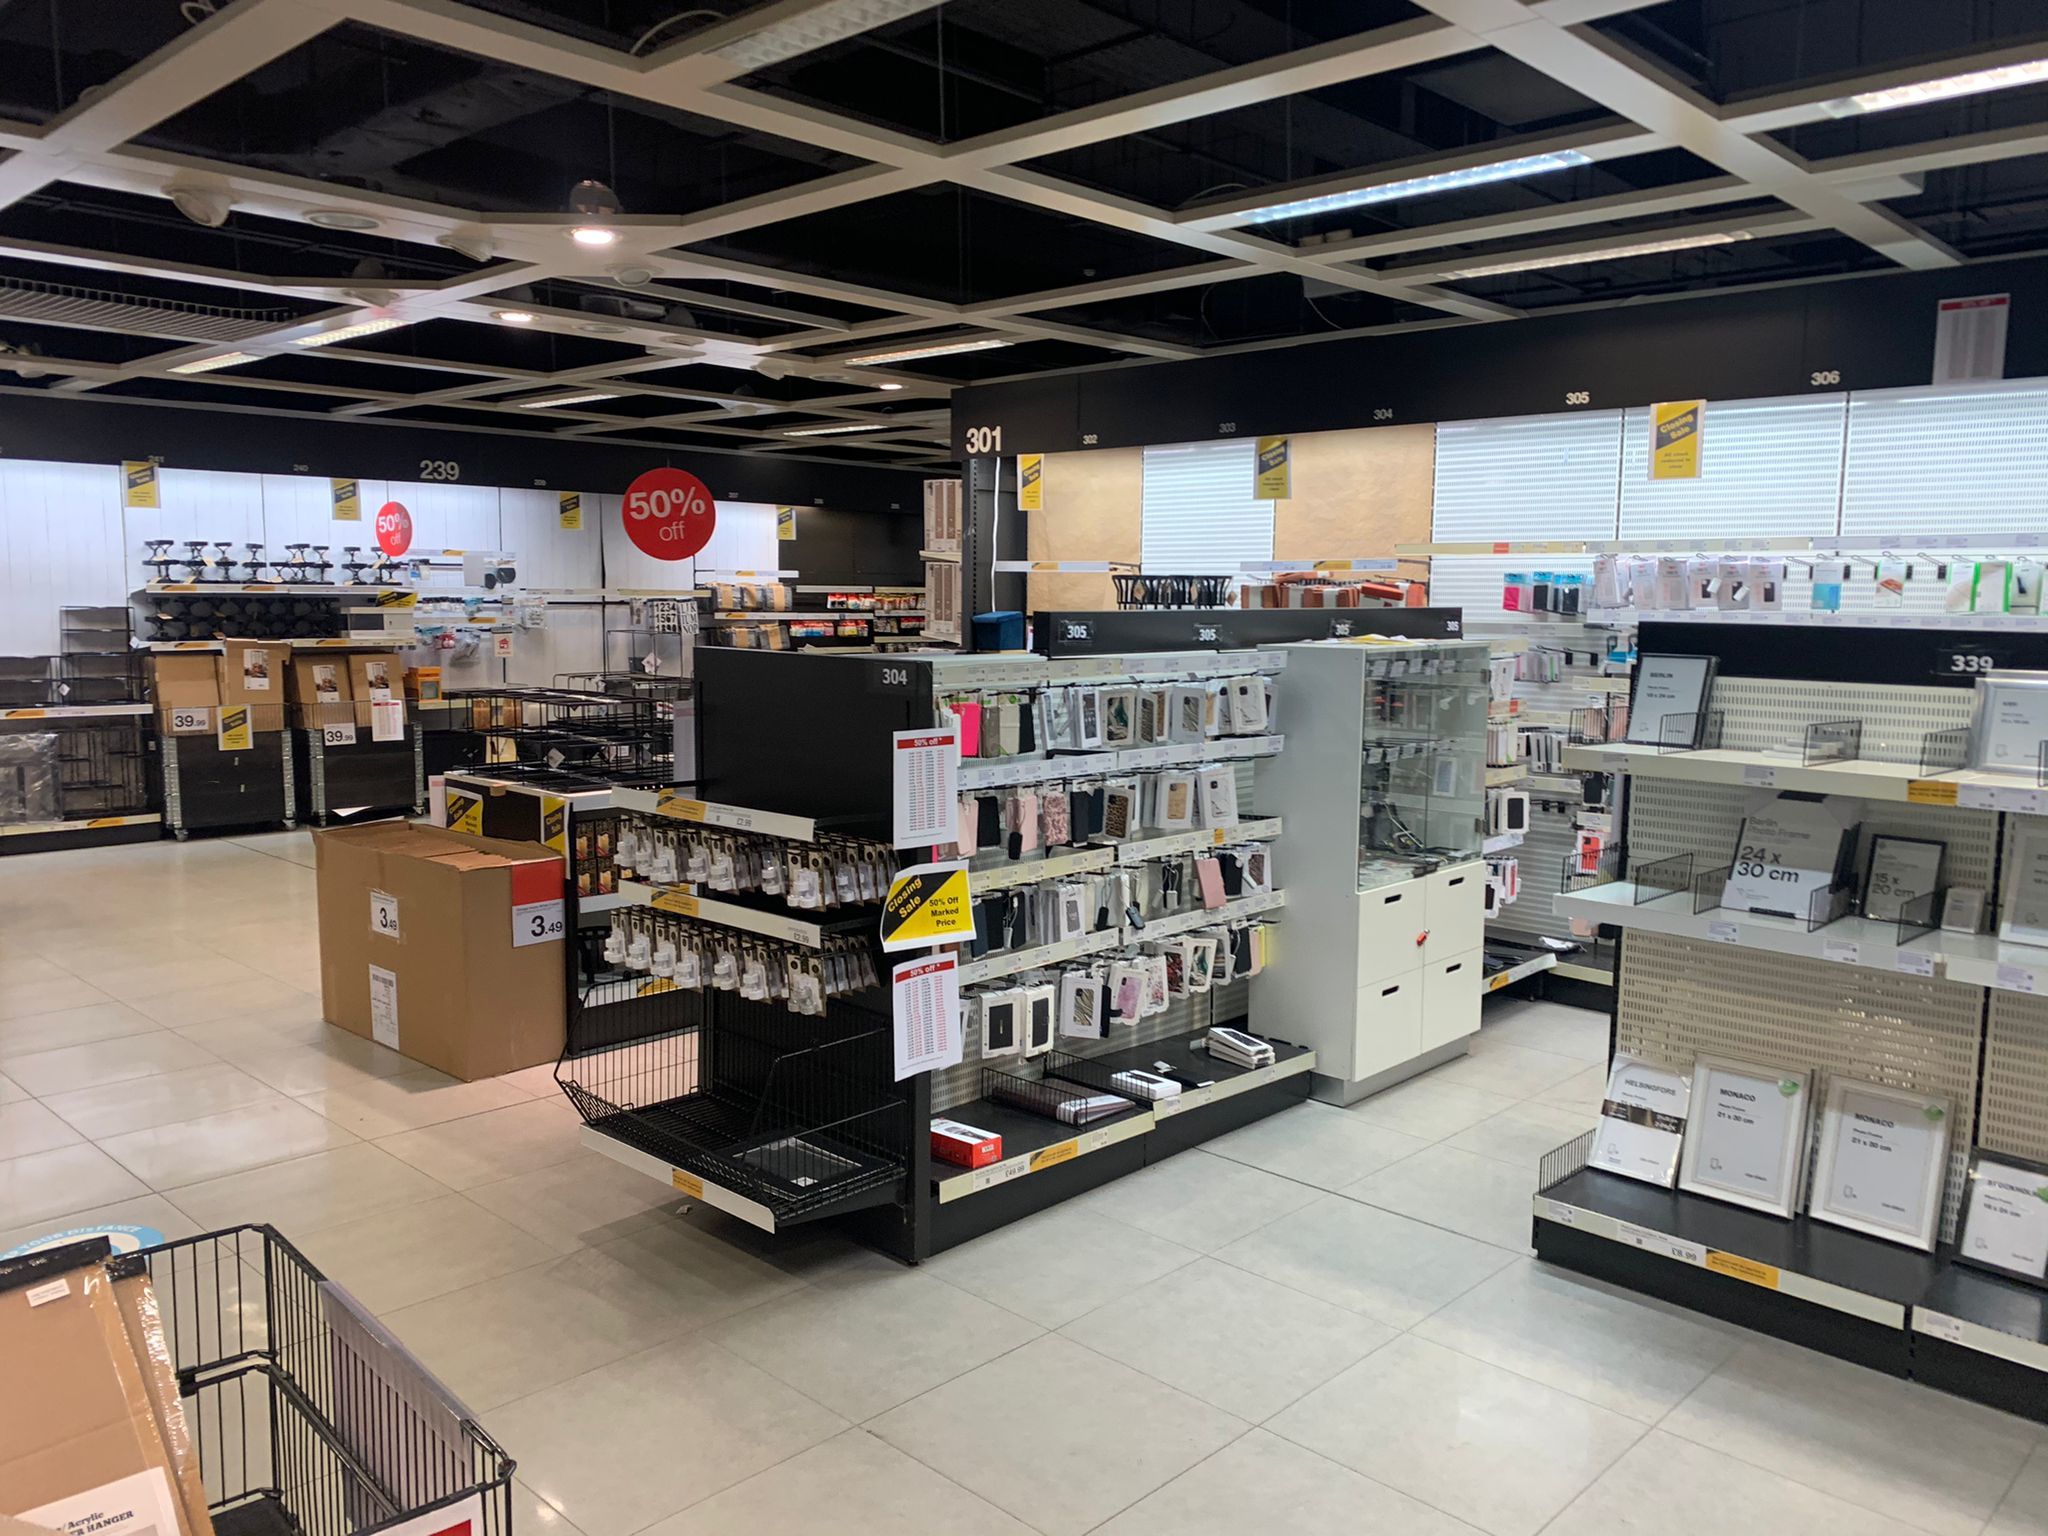 Clas Ohlson is set to close in August, but it is not known when